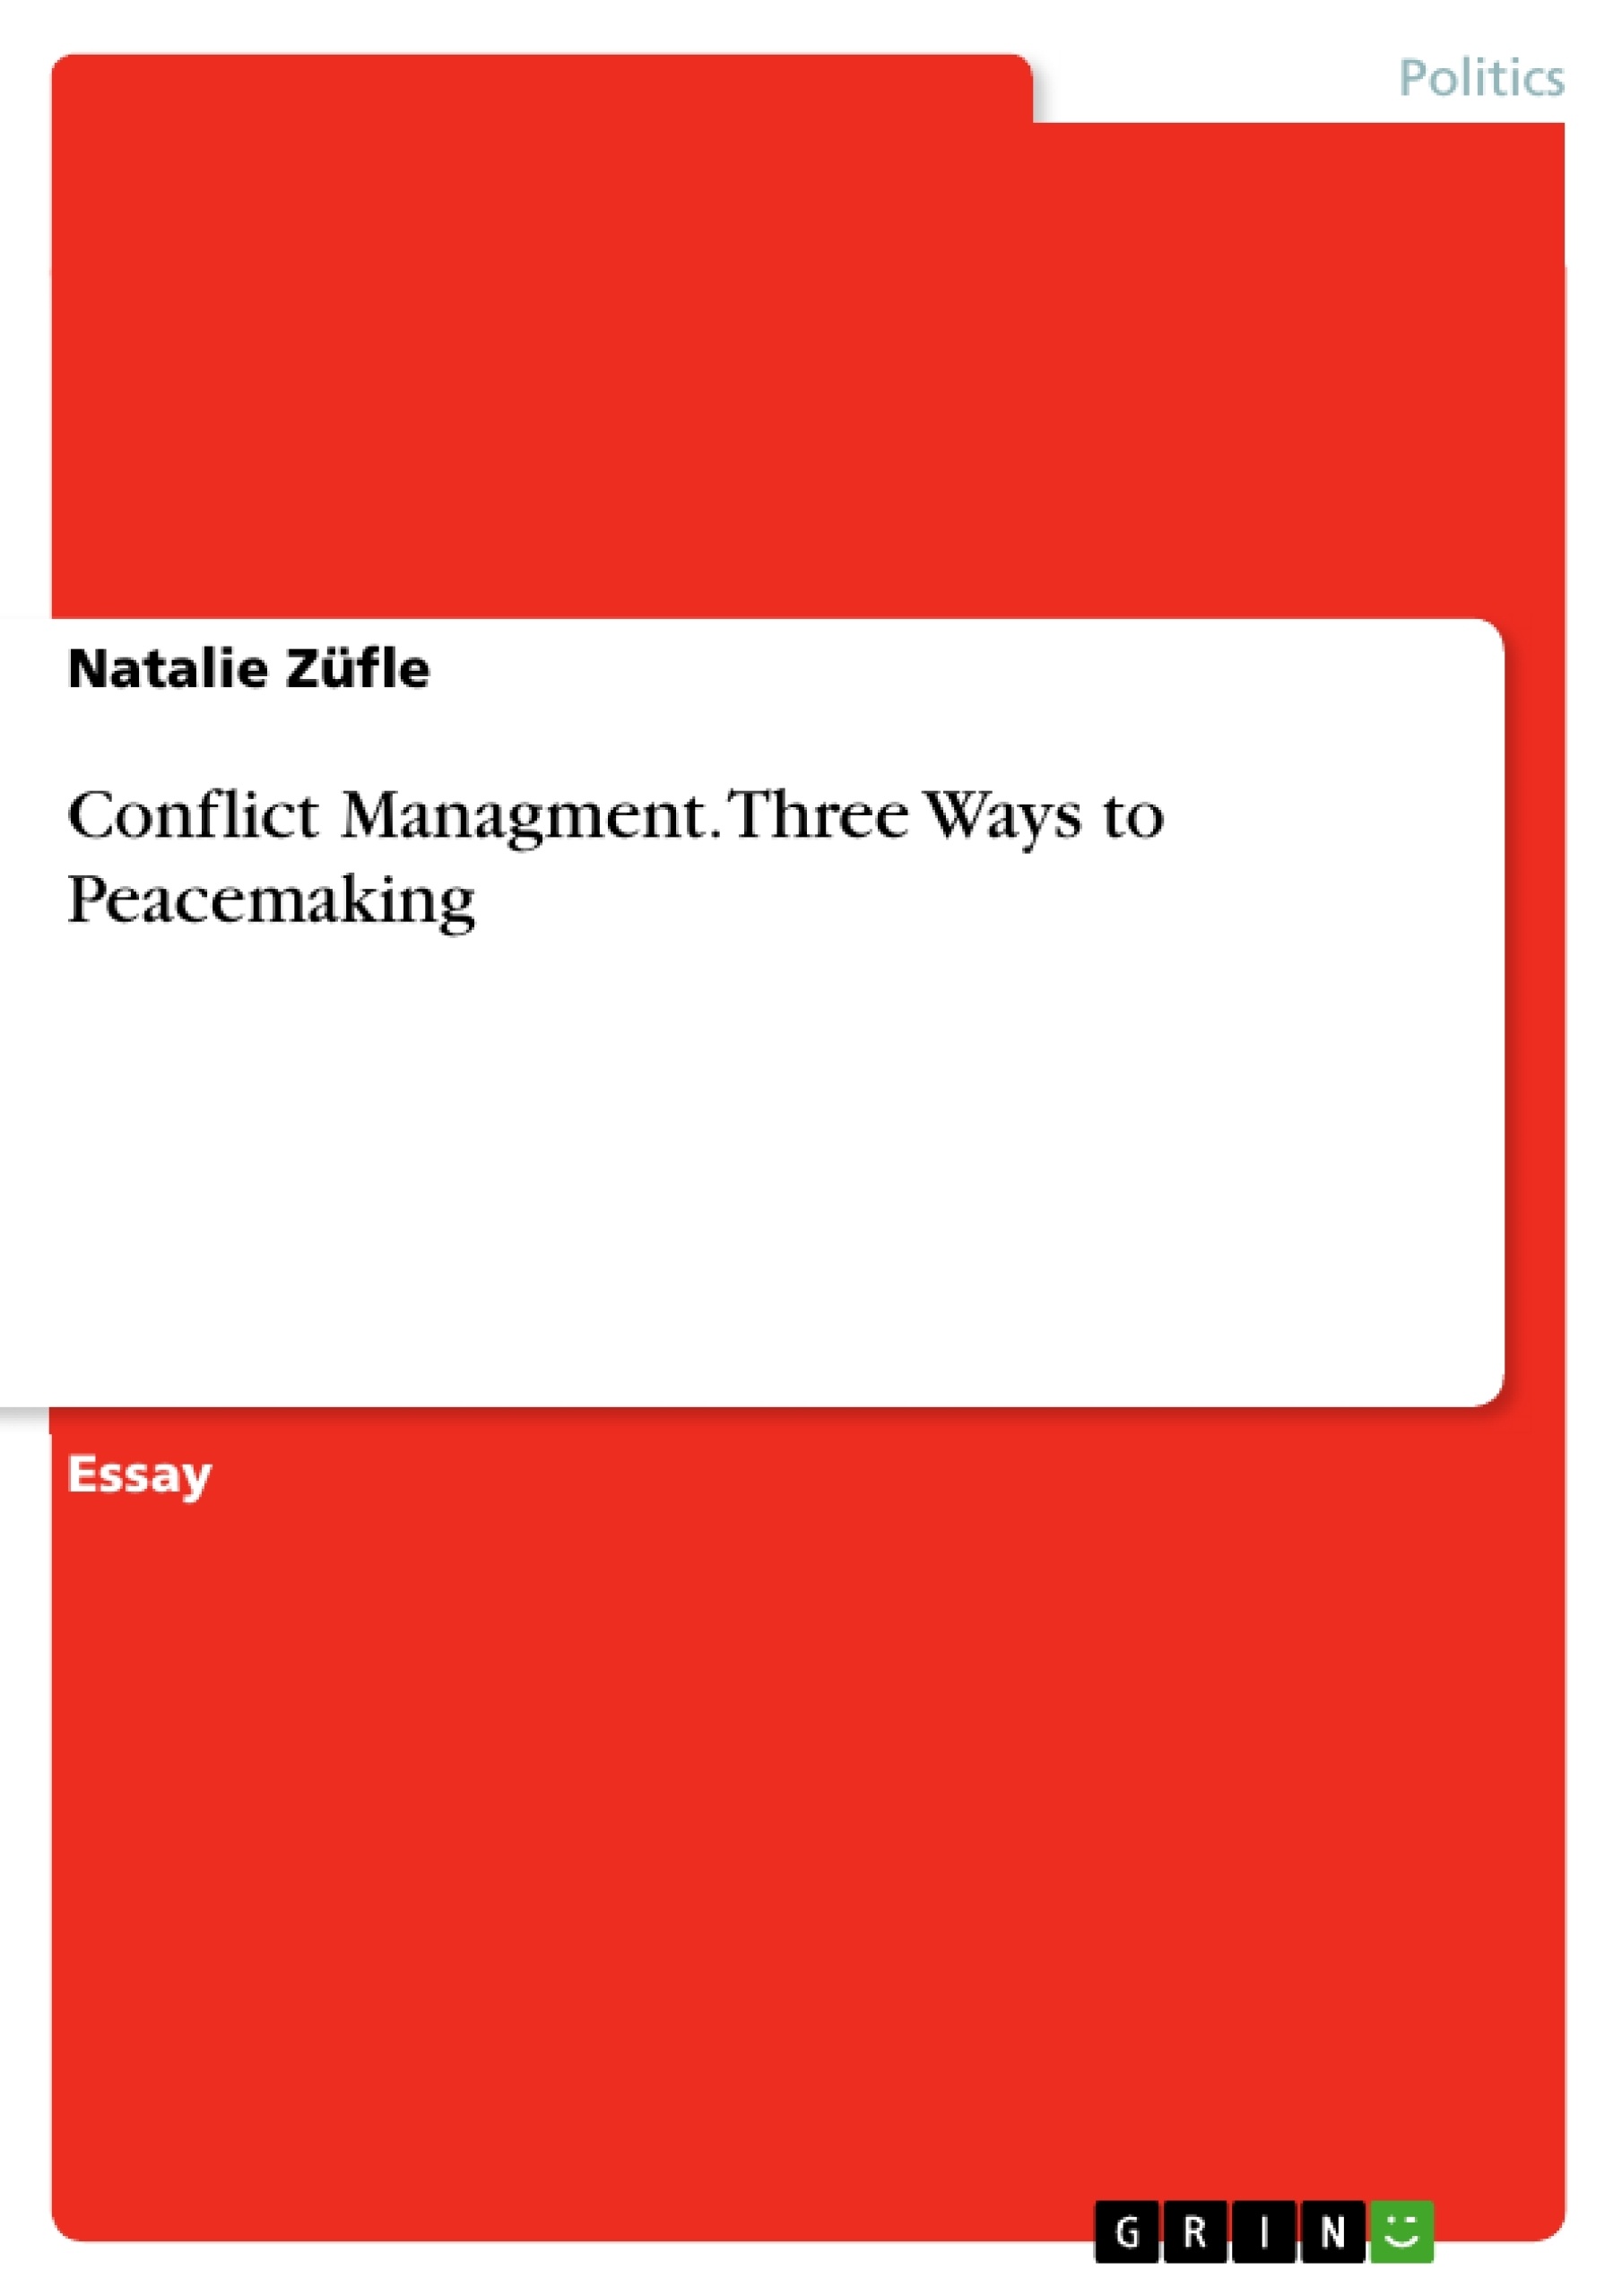 Titre: Conflict Managment. Three Ways to Peacemaking